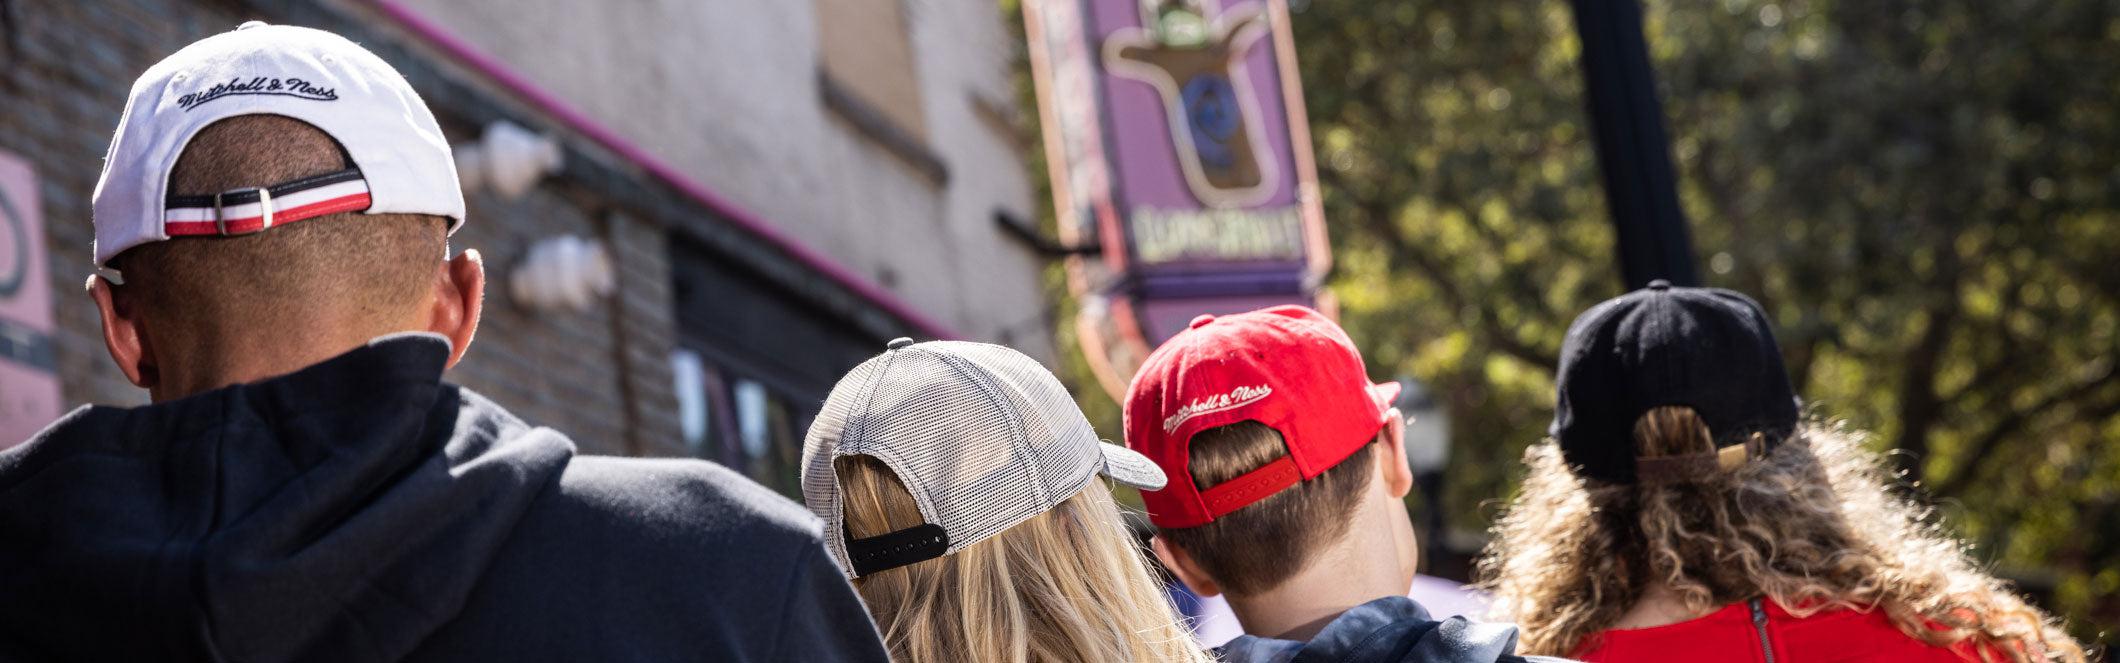 back of Trail Blazers snapback hats in front of voodoo donunts